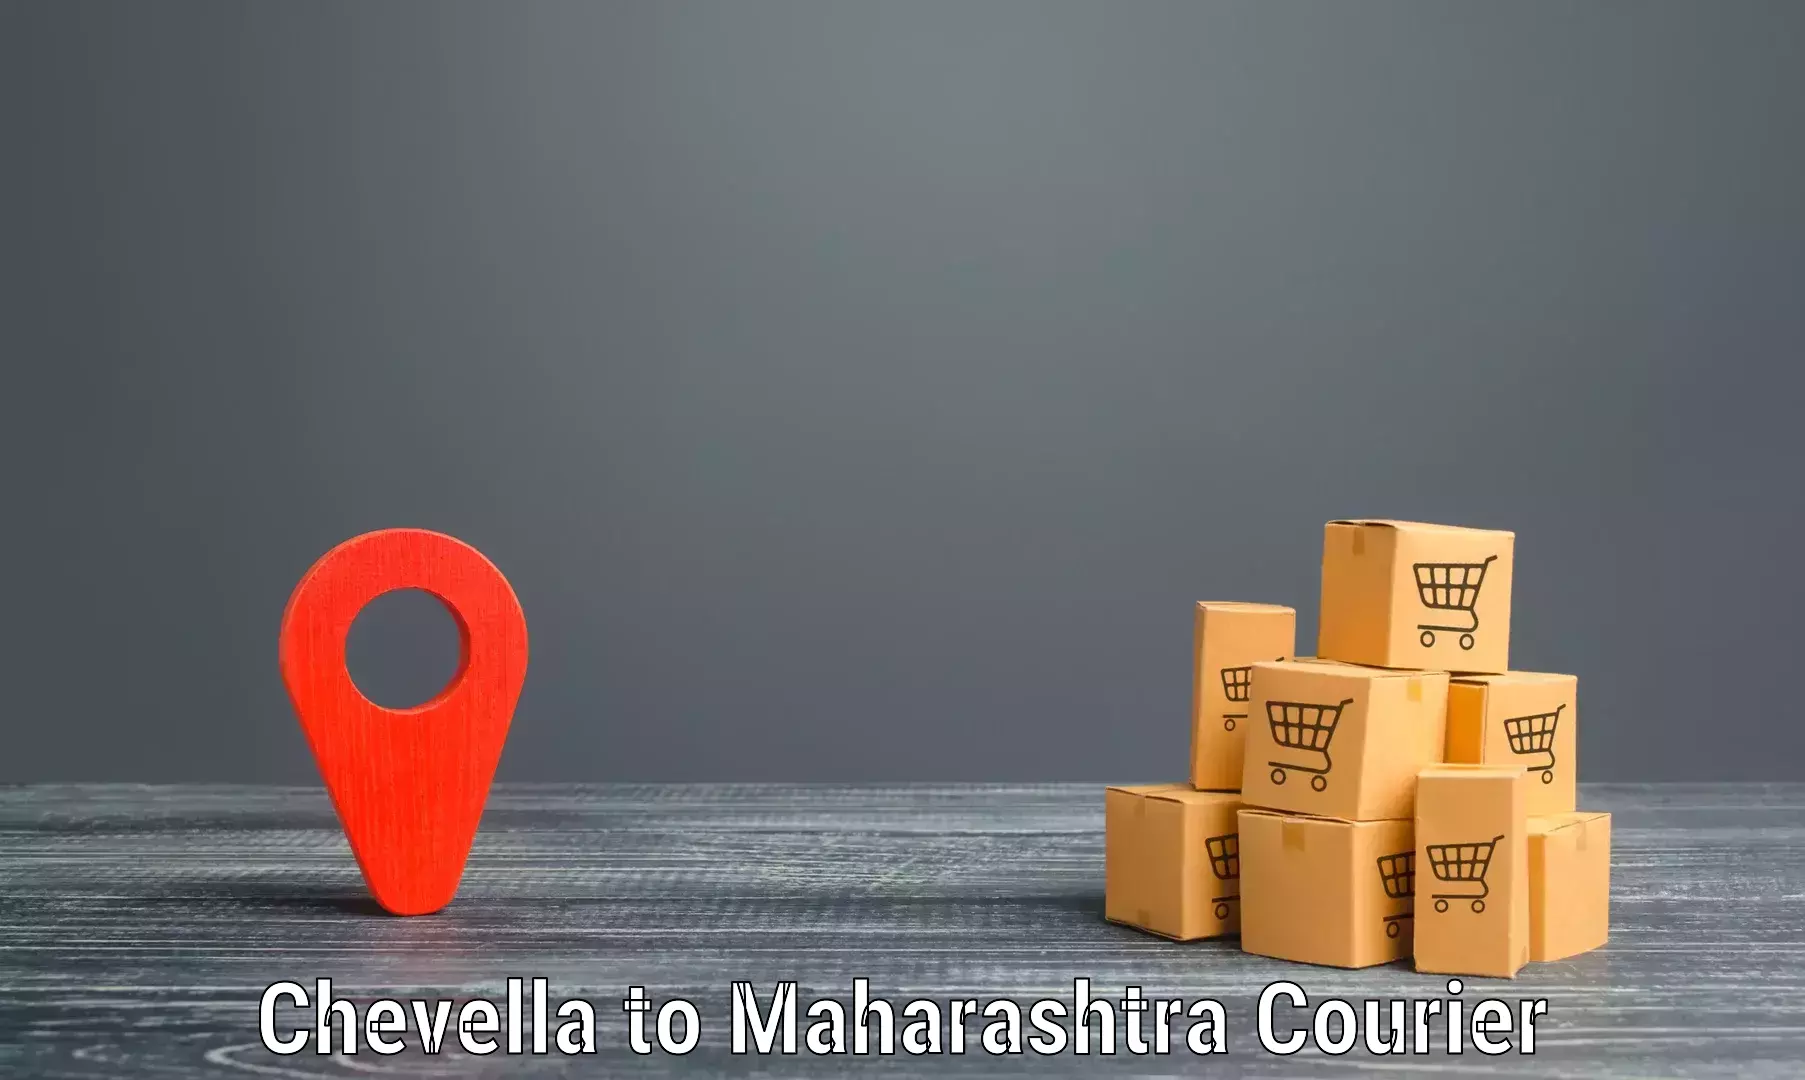 Easy access courier services in Chevella to Chinchbunder